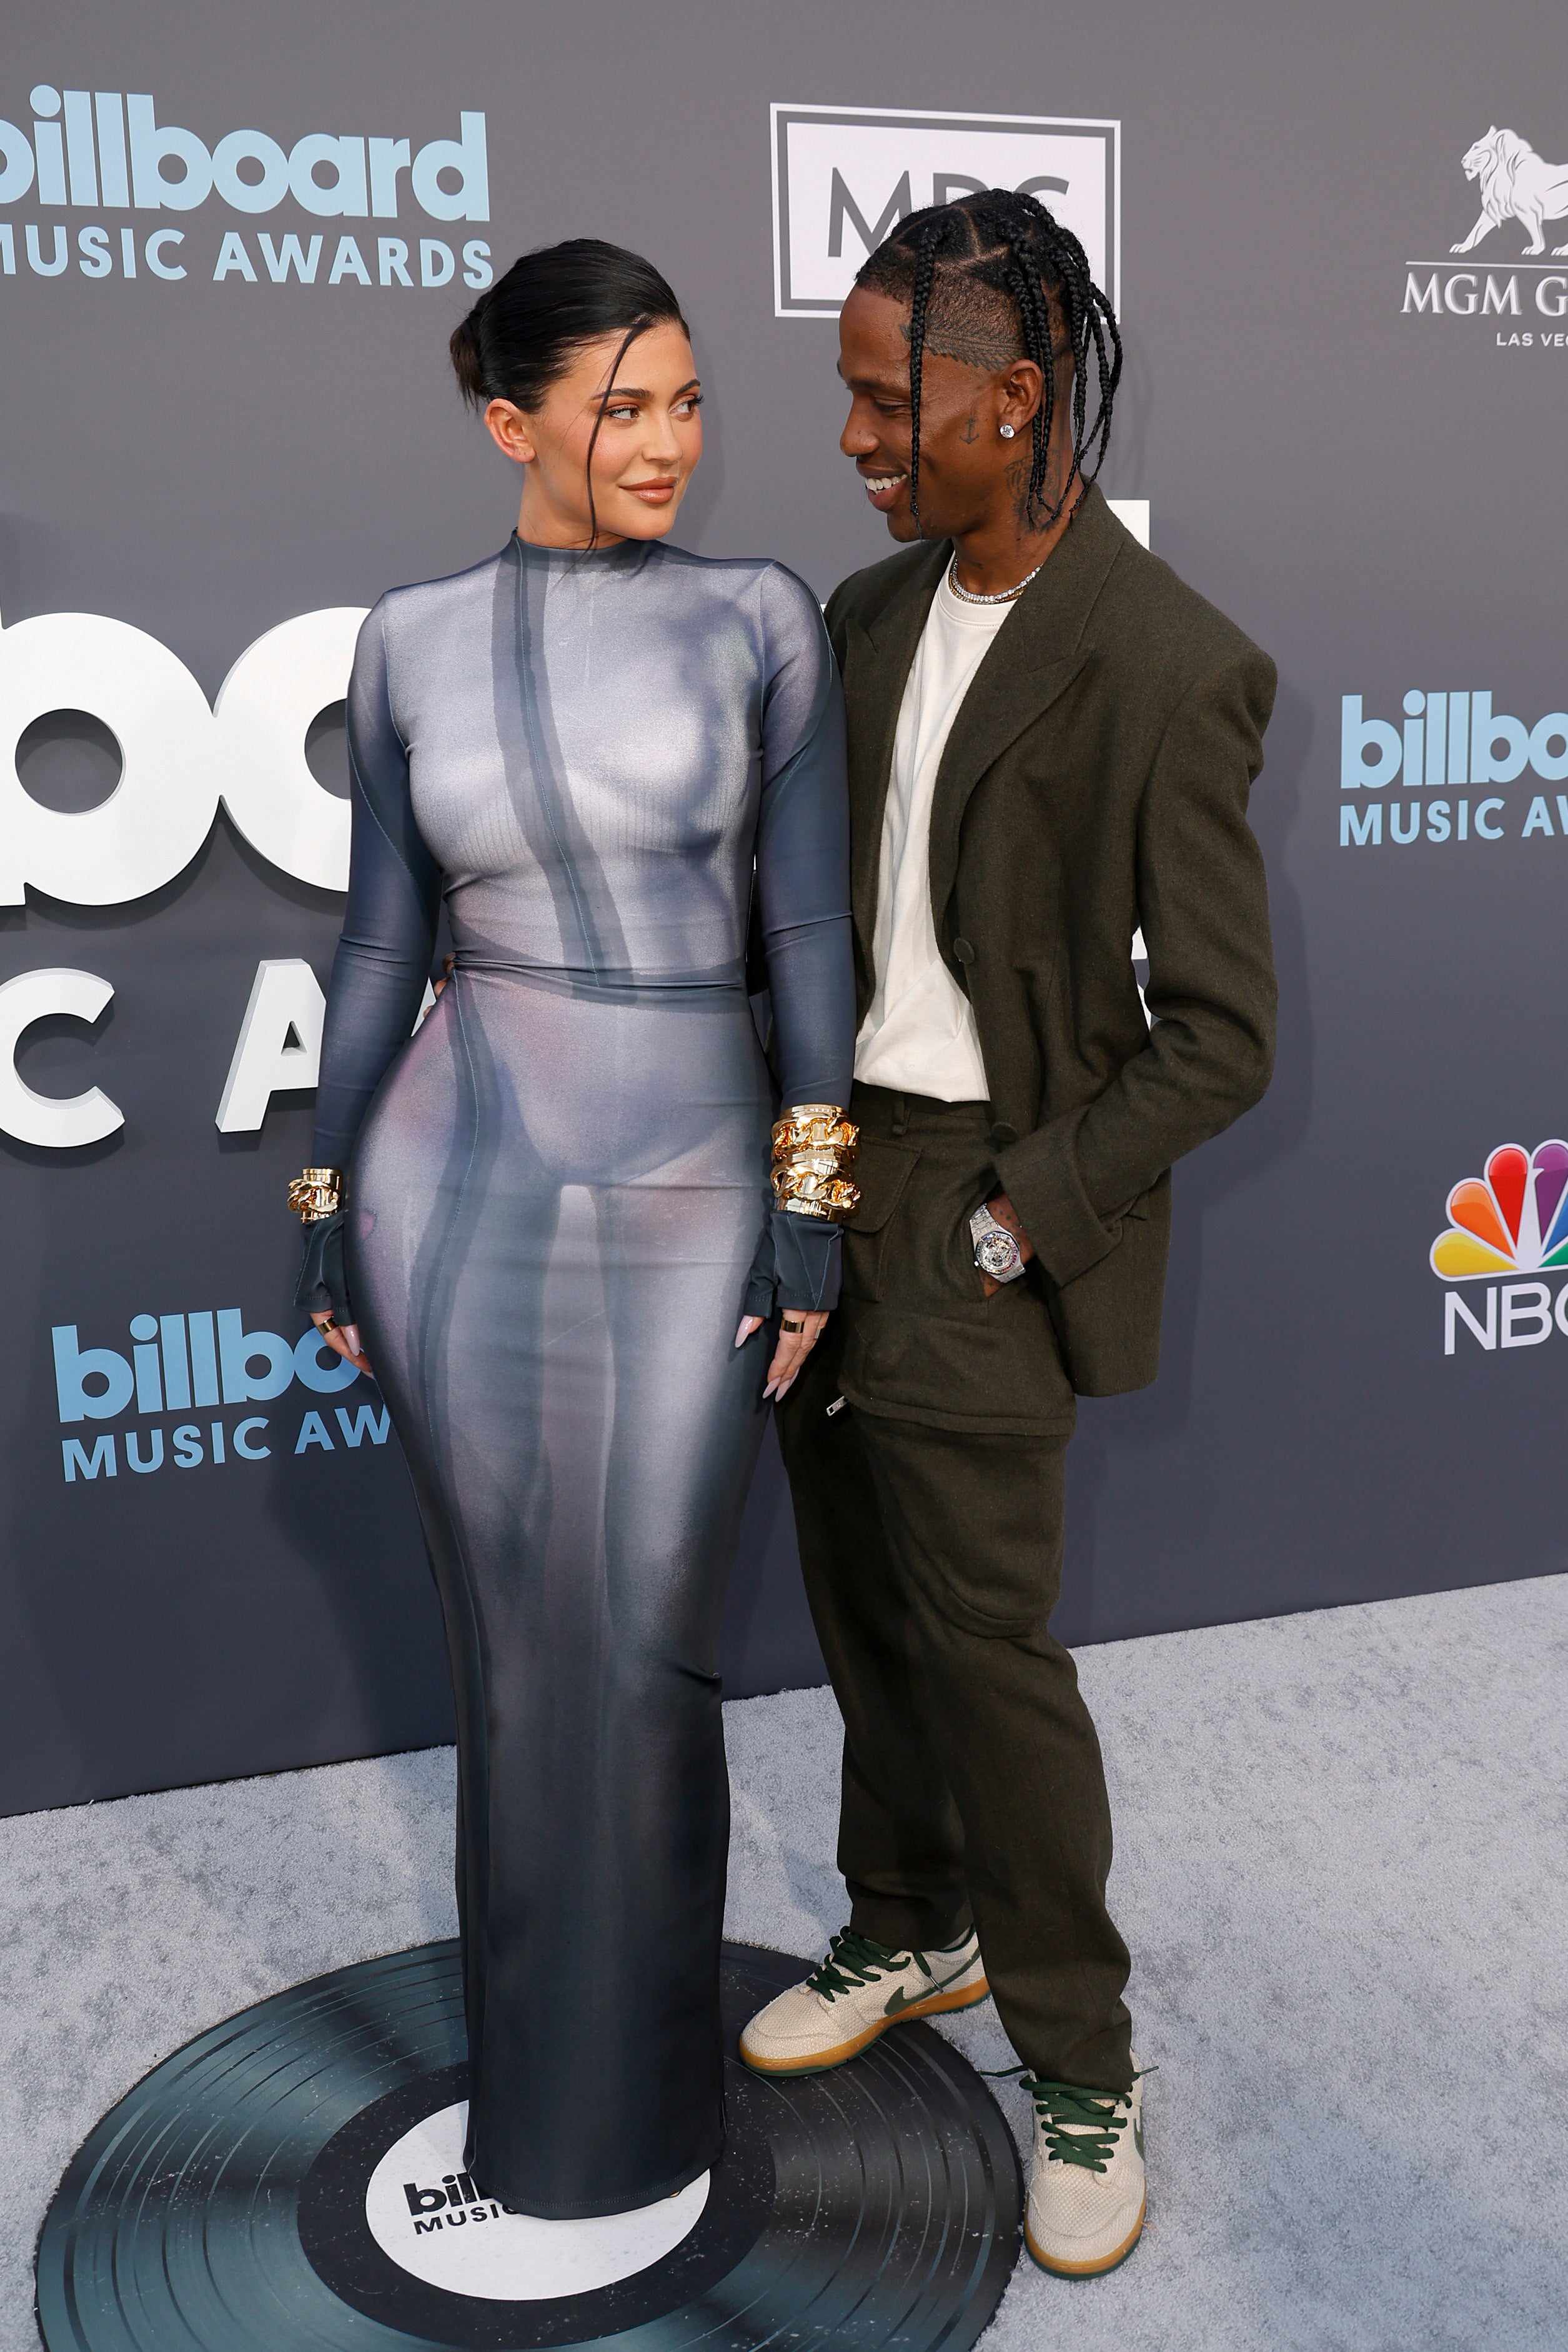 Billboard Music Awards 2022: The best-dressed stars on the red carpet